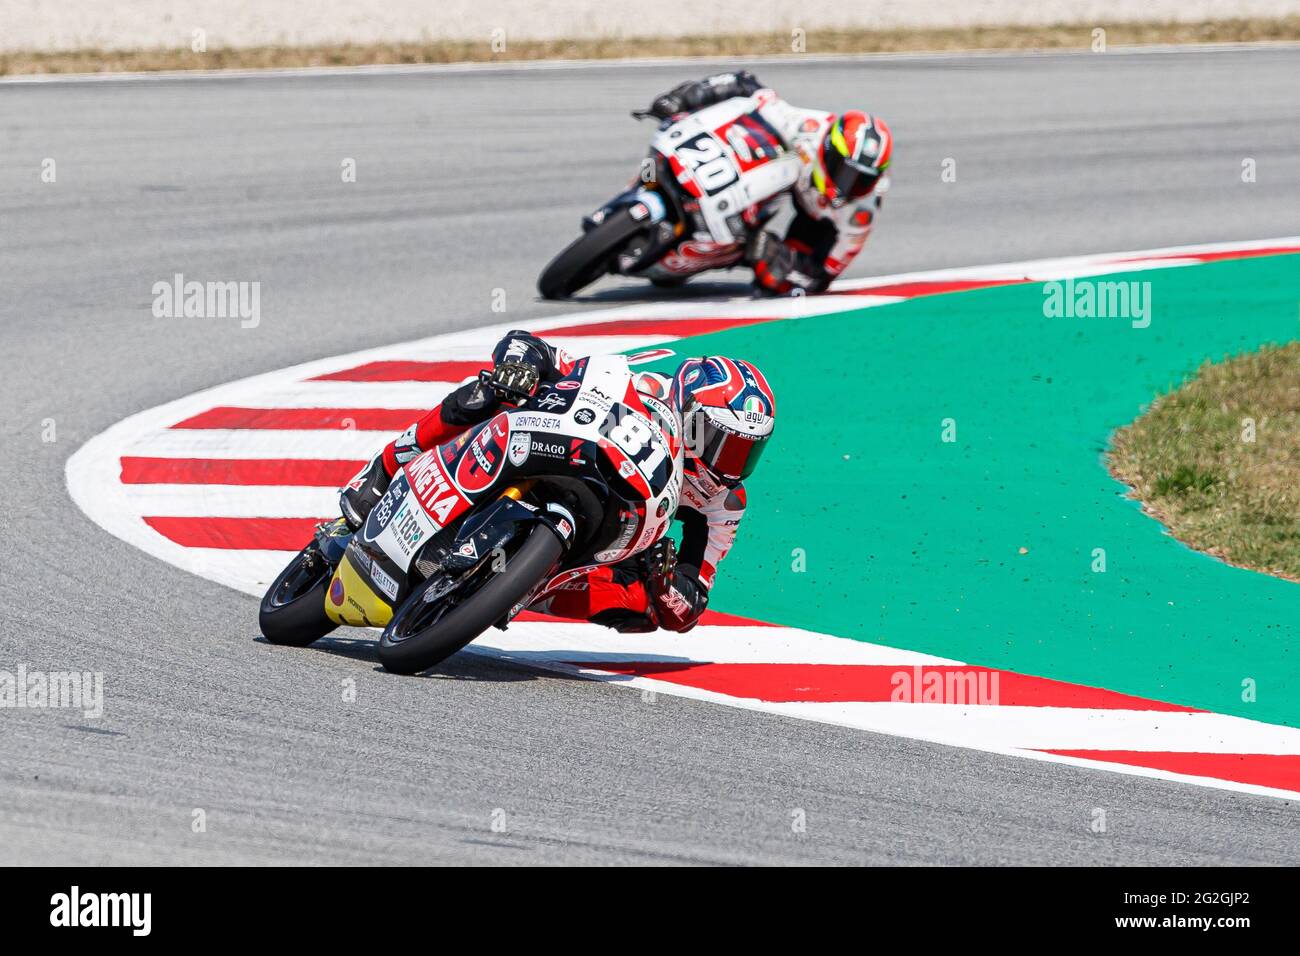 Montmelo, Barcelona, Spain. 11th June, 2021. Senna Agius from Australia,  rider of Sic58 Squadra Corse team with Honda during the Official Testing  Session Moto 3 of FIM CEV Repsol Barcelona in Circuit